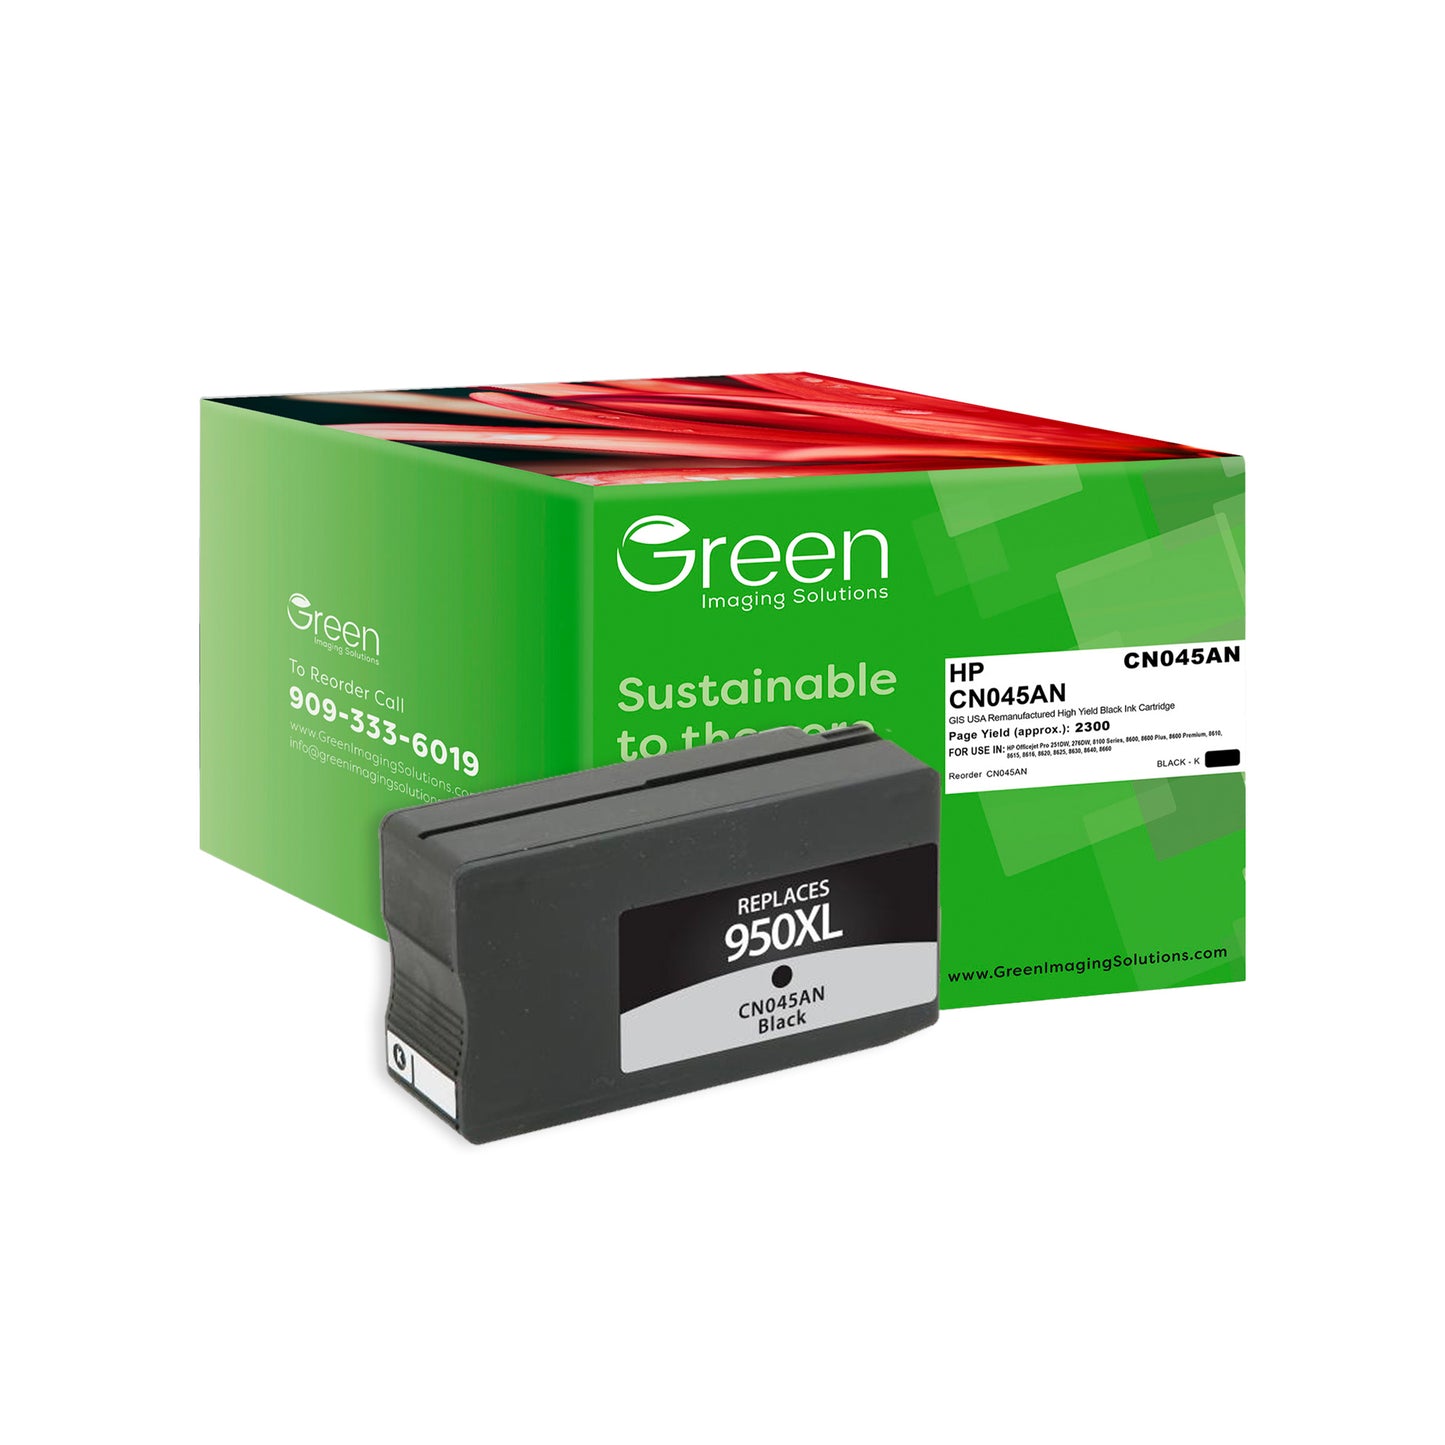 Green Imaging Solutions USA Remanufactured High Yield Black Ink Cartridge for HP 950XL (CN045AN)